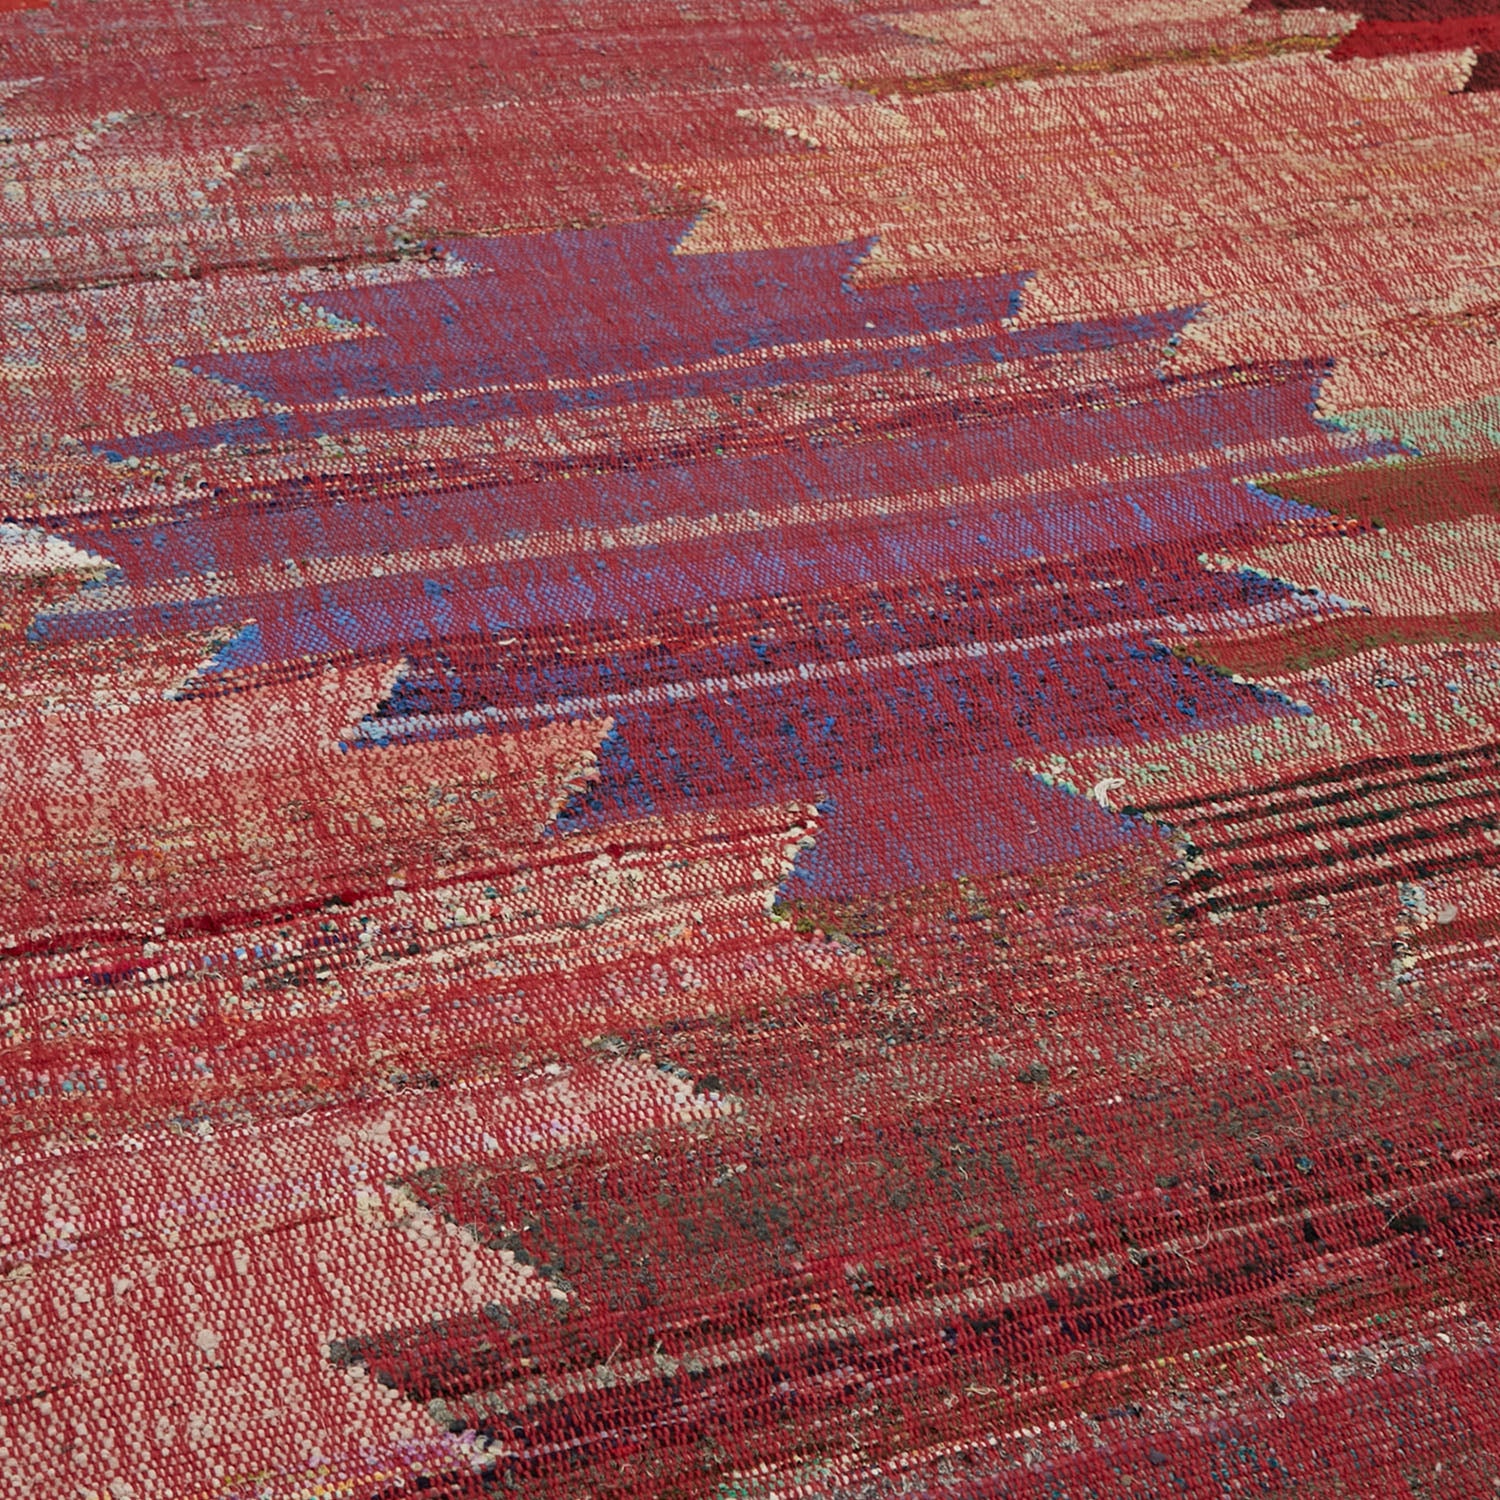 Vibrant, abstract woven fabric with intricate texture in red and blue.